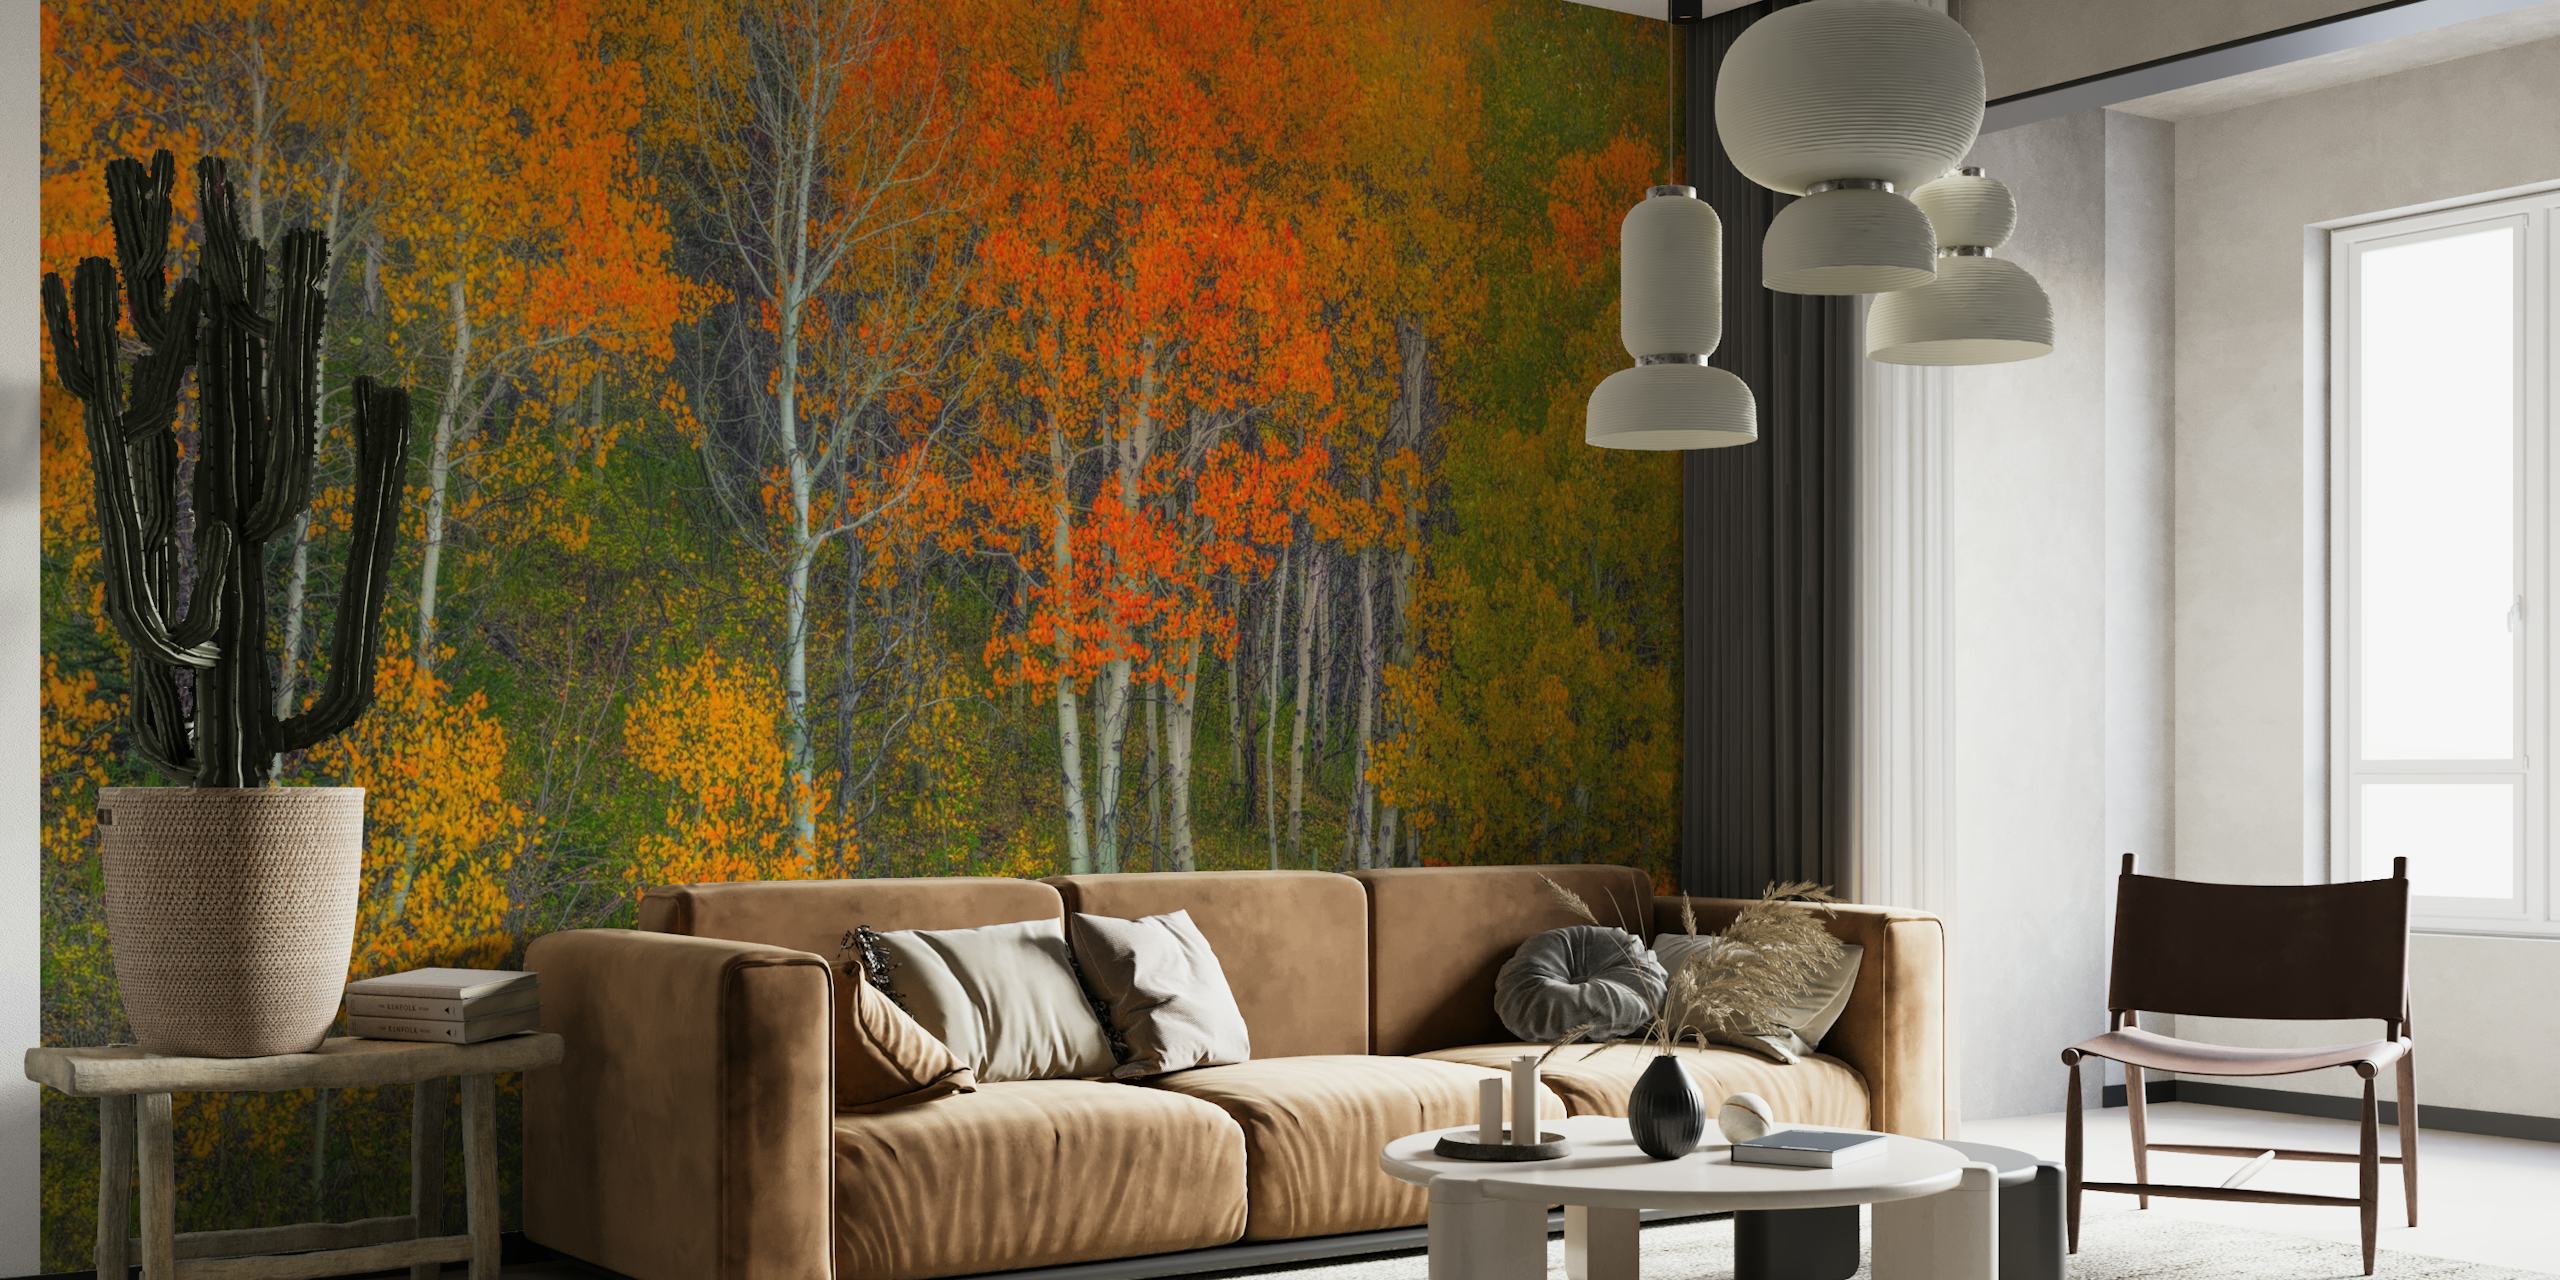 Wall mural with autumn forest scene featuring bright oranges, reds, and yellows